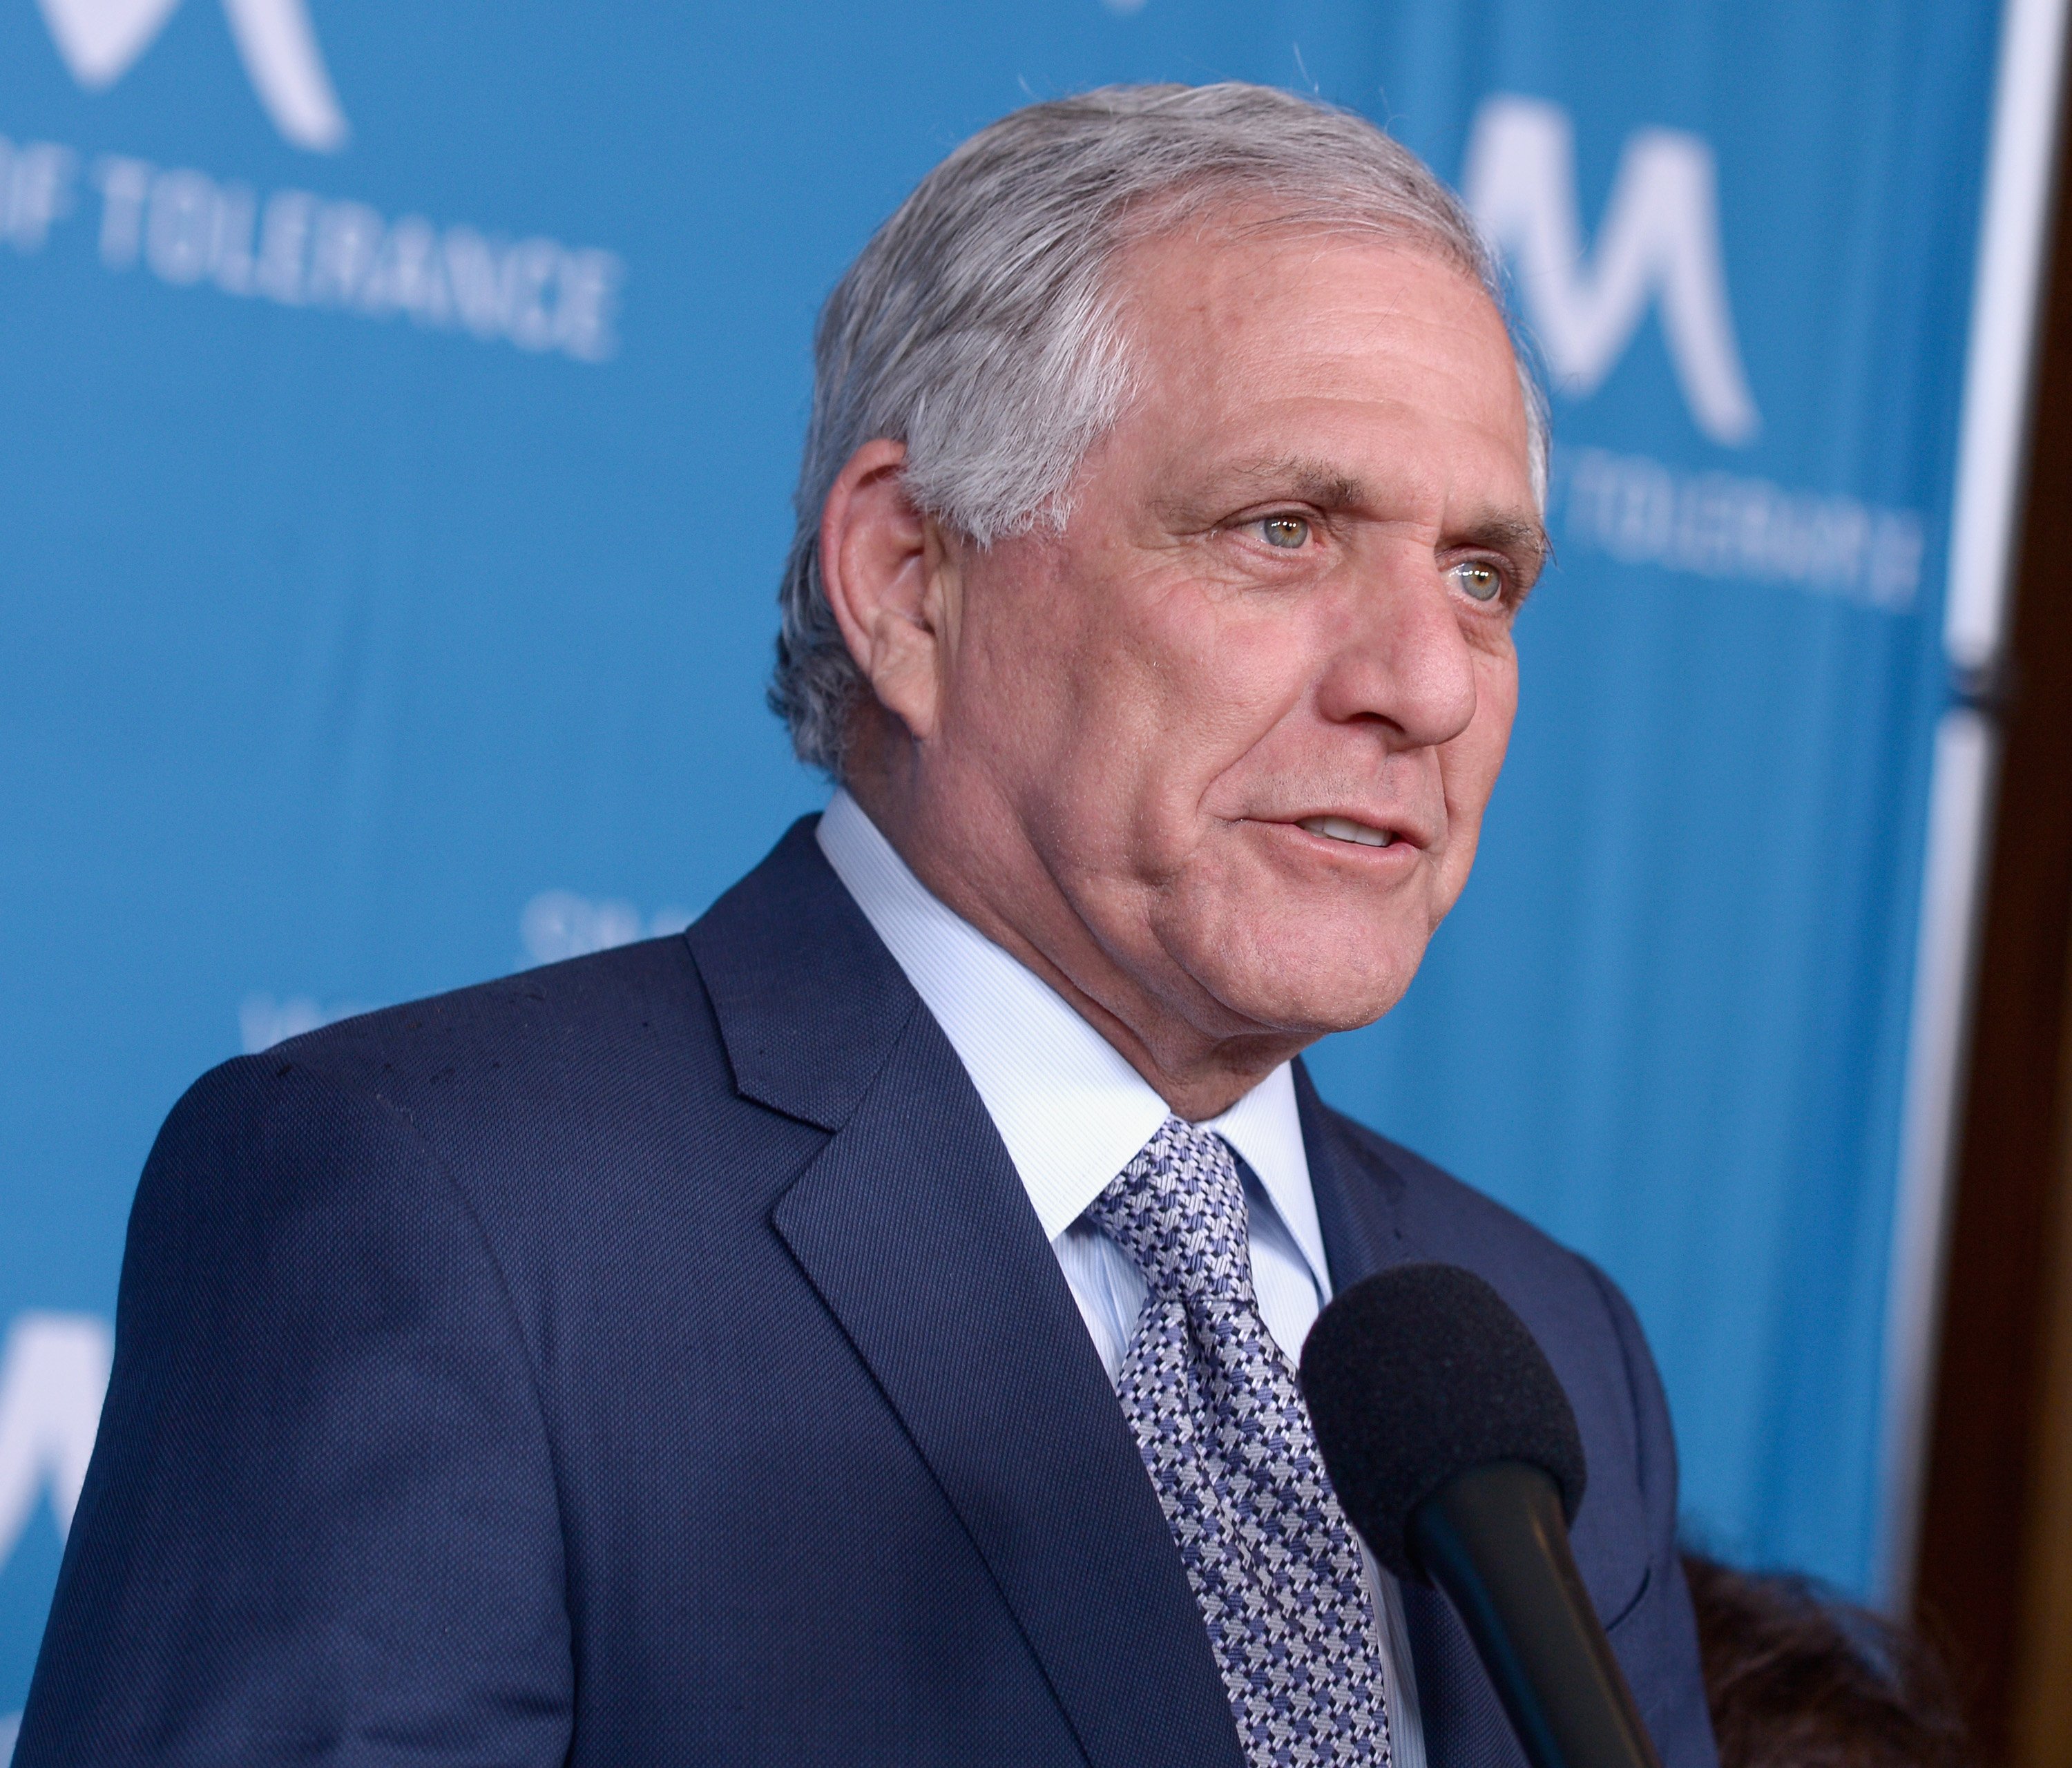 Leslie Moonves attends the 2018 Simon Wiesenthal Center National Tribute Dinner at The Beverly Hilton Hotel on March 22, 2018, in Beverly Hills, California | Source: Getty Images